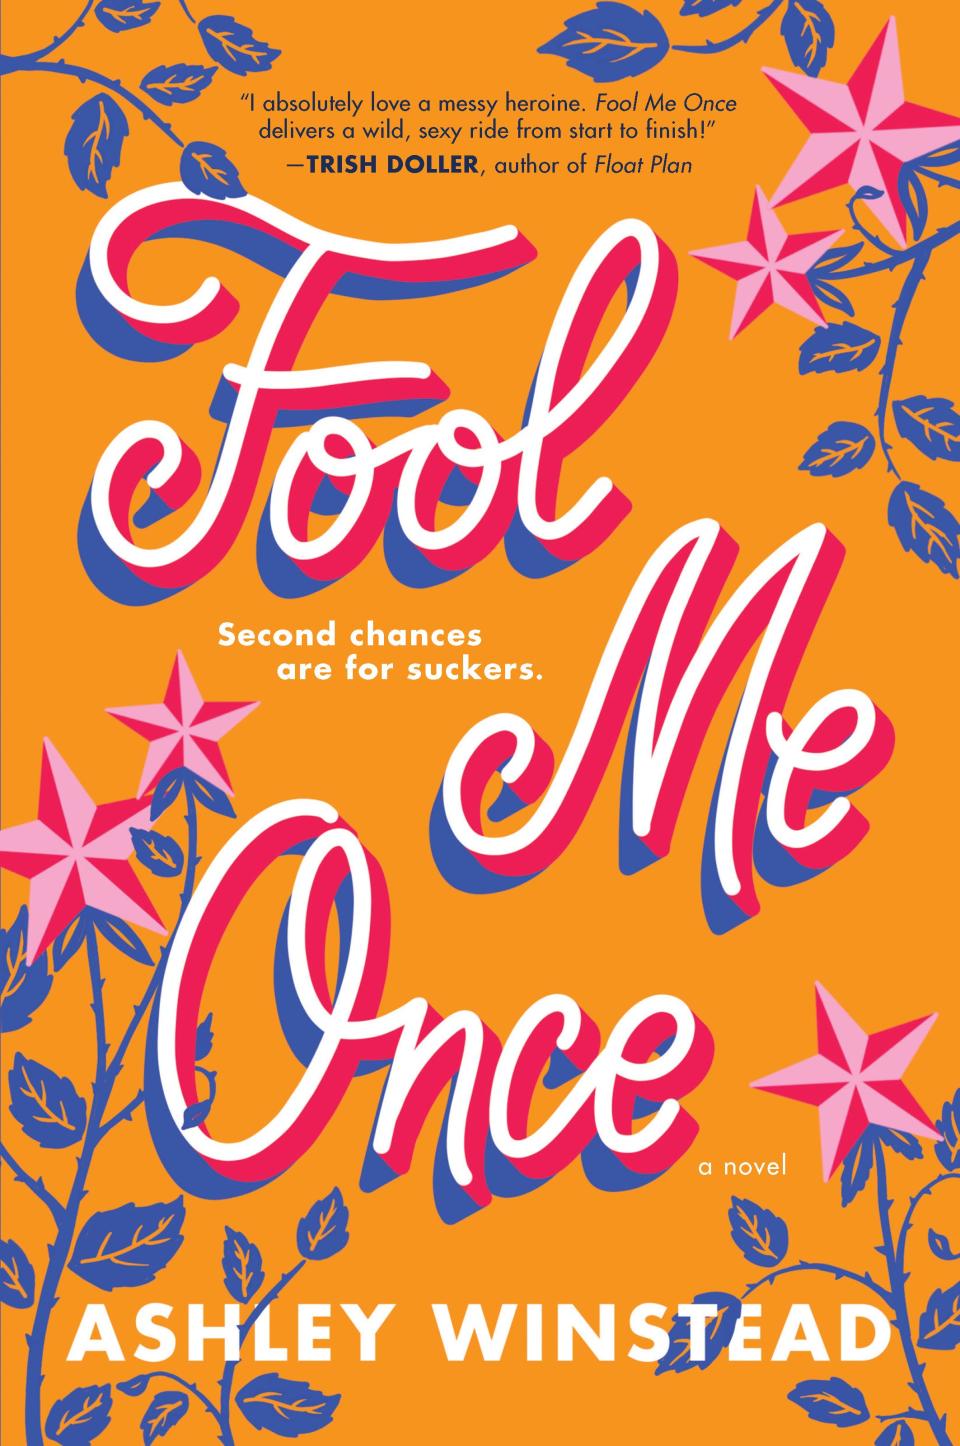 "Fool Me Once," by Ashley Winstead